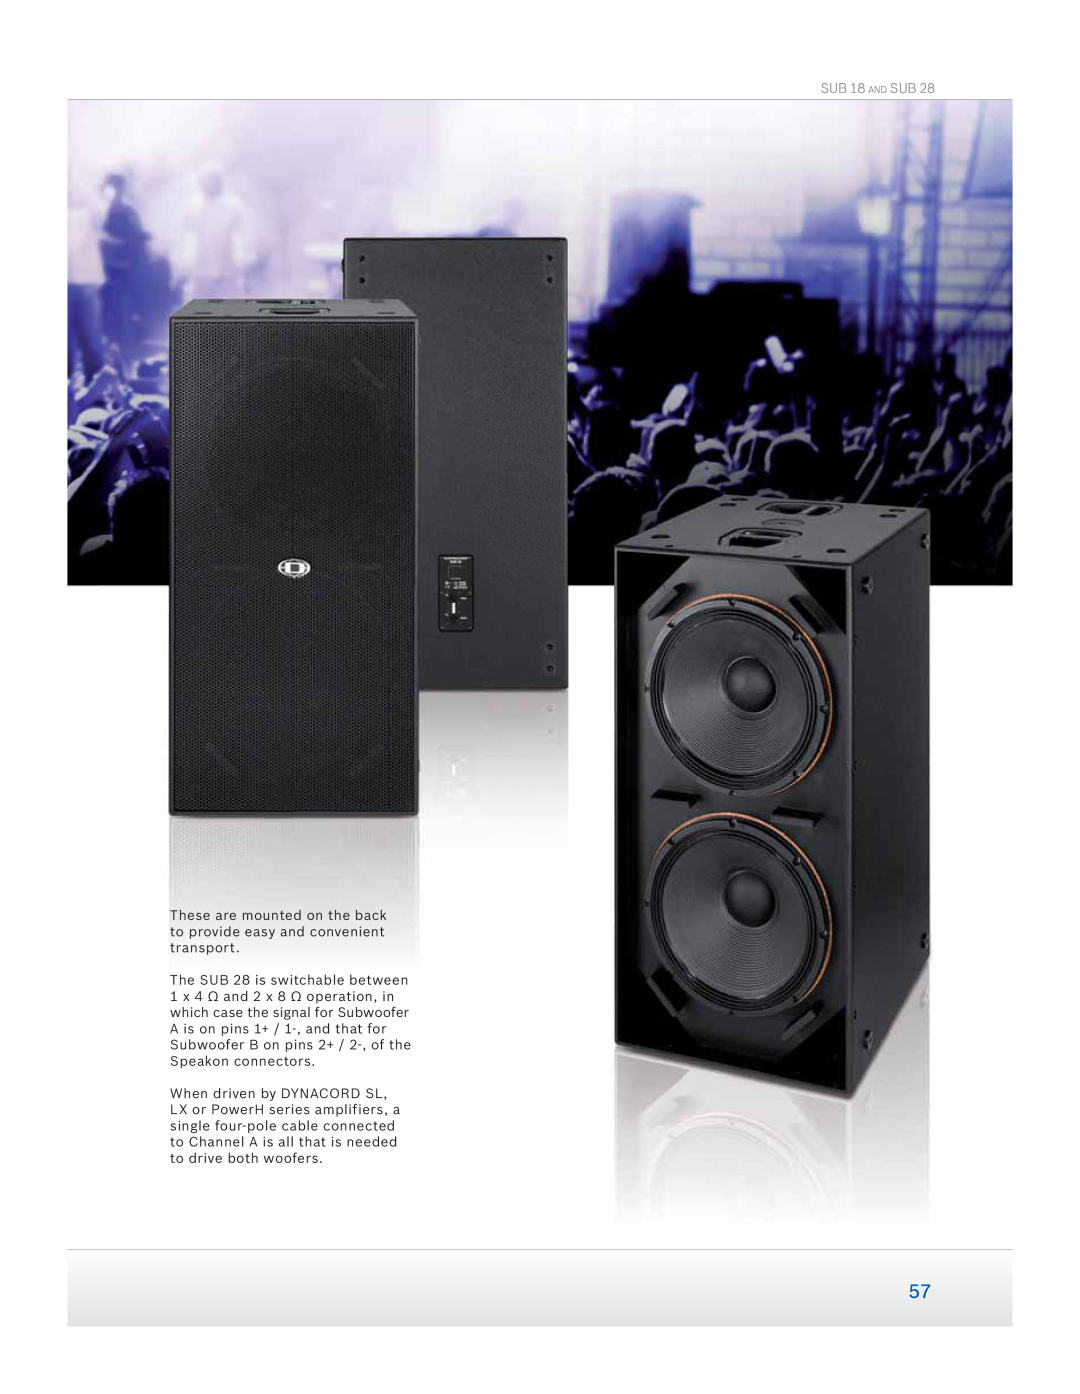 Dynacord Speaker manual SUB 18 AND SUB, These are mounted on the back to provide easy and convenient transport 